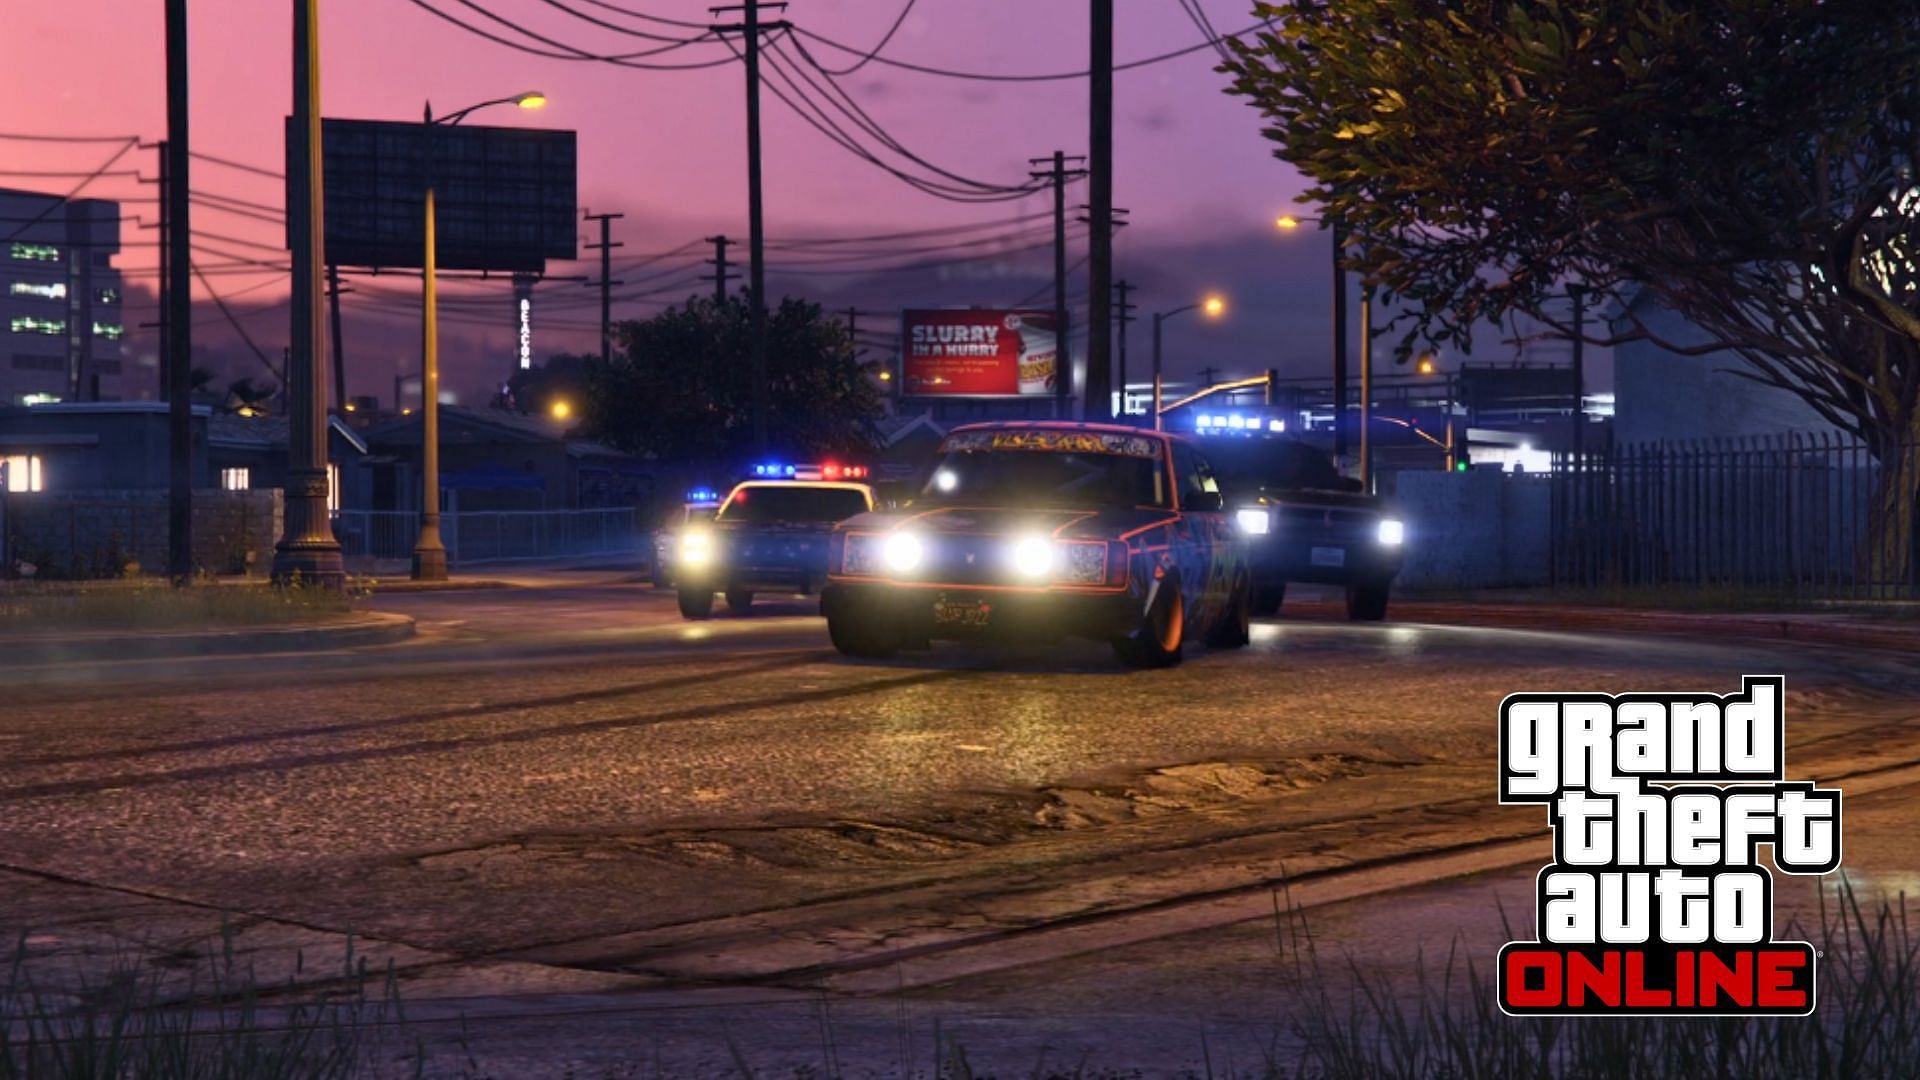 A still from the DLC trailer released last week (Image via Rockstar Games)